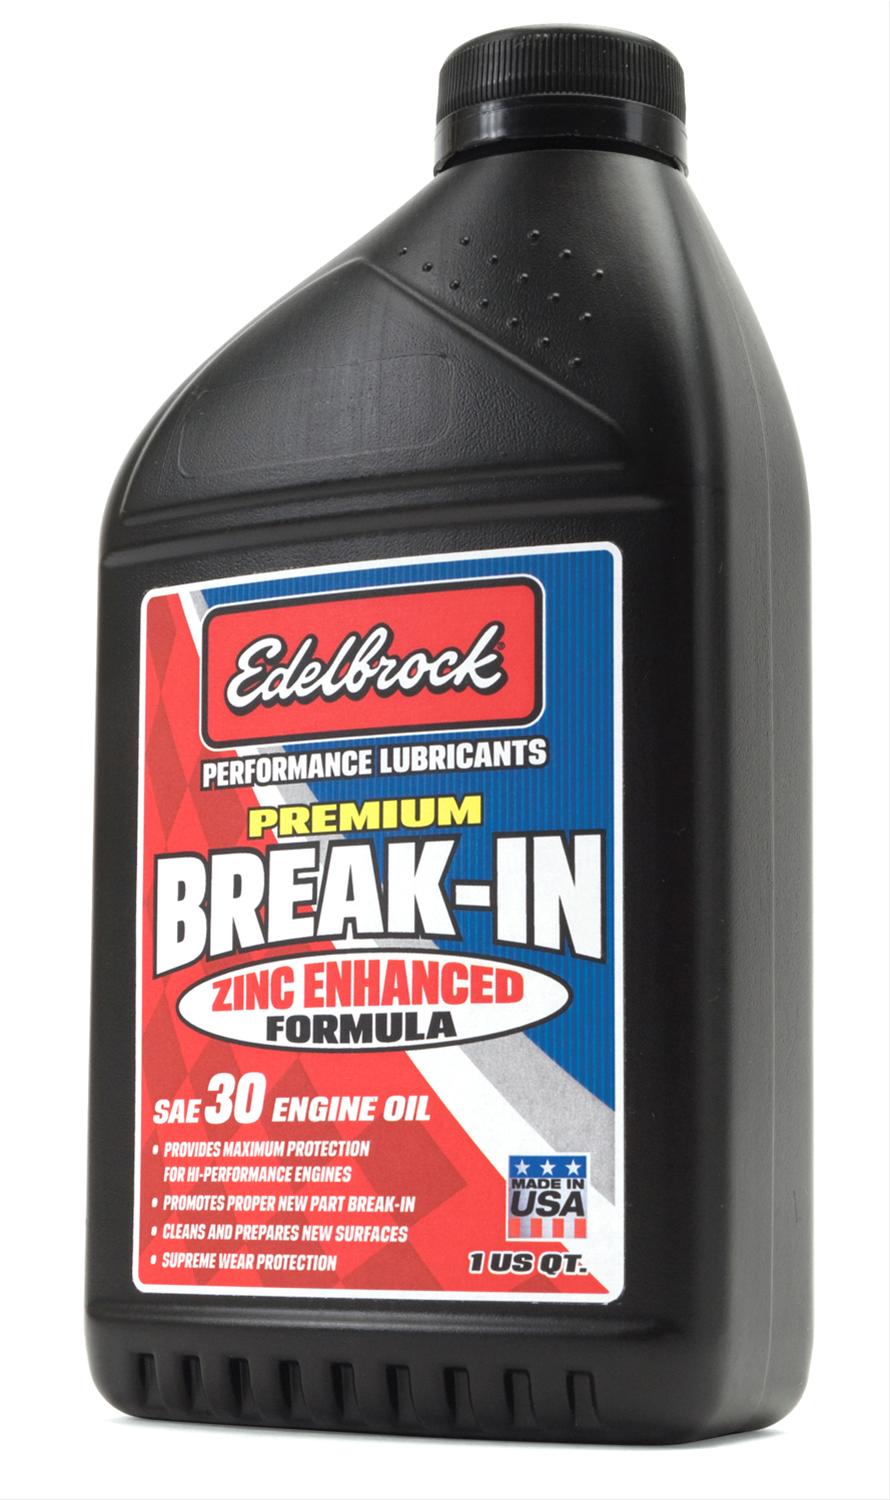 conventional oil brand for breakin evom